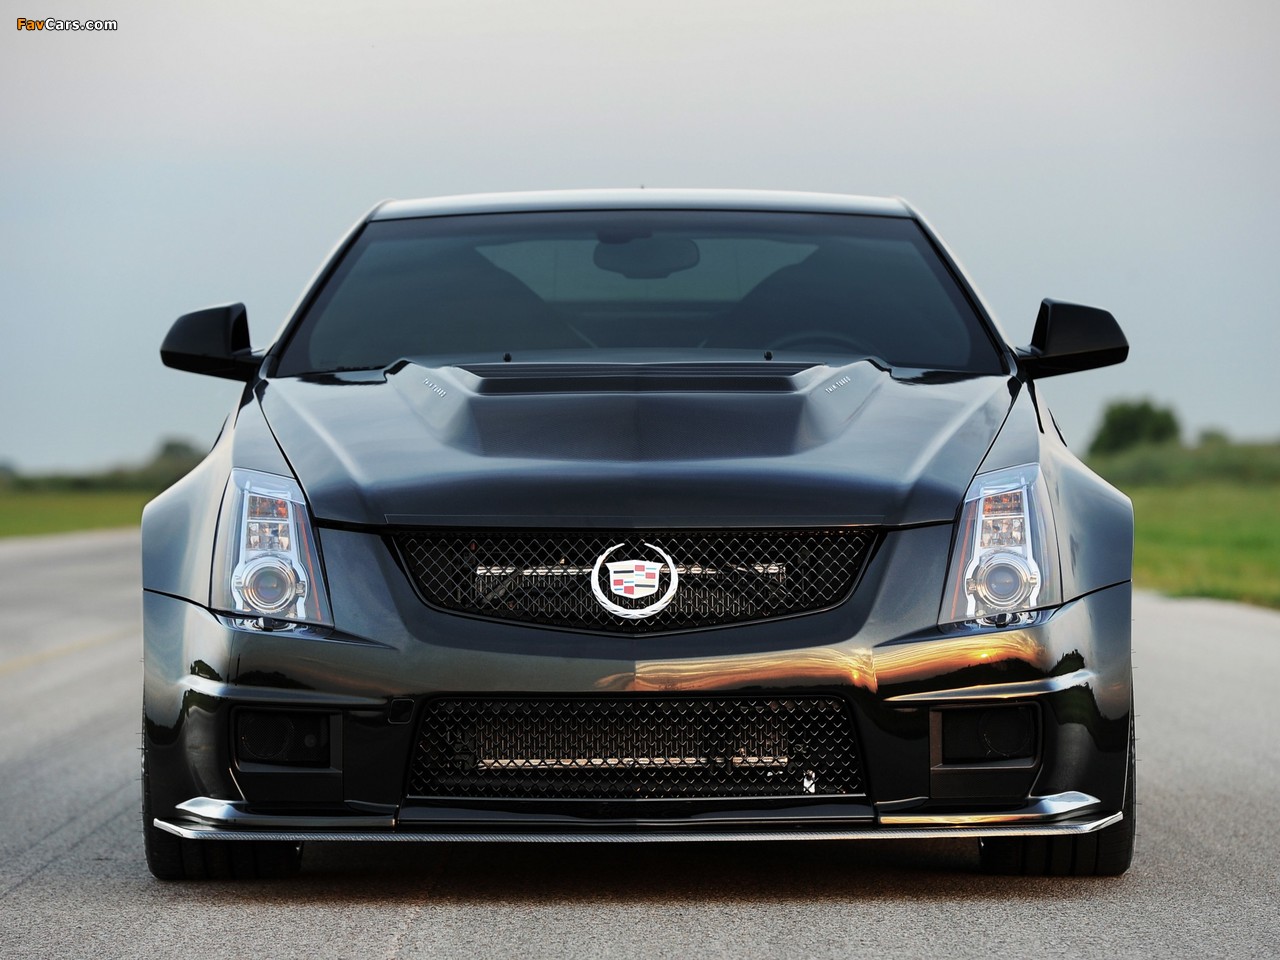 Hennessey Cadillac VR1200 Twin Turbo Coupe 2012 images (1280 x 960)